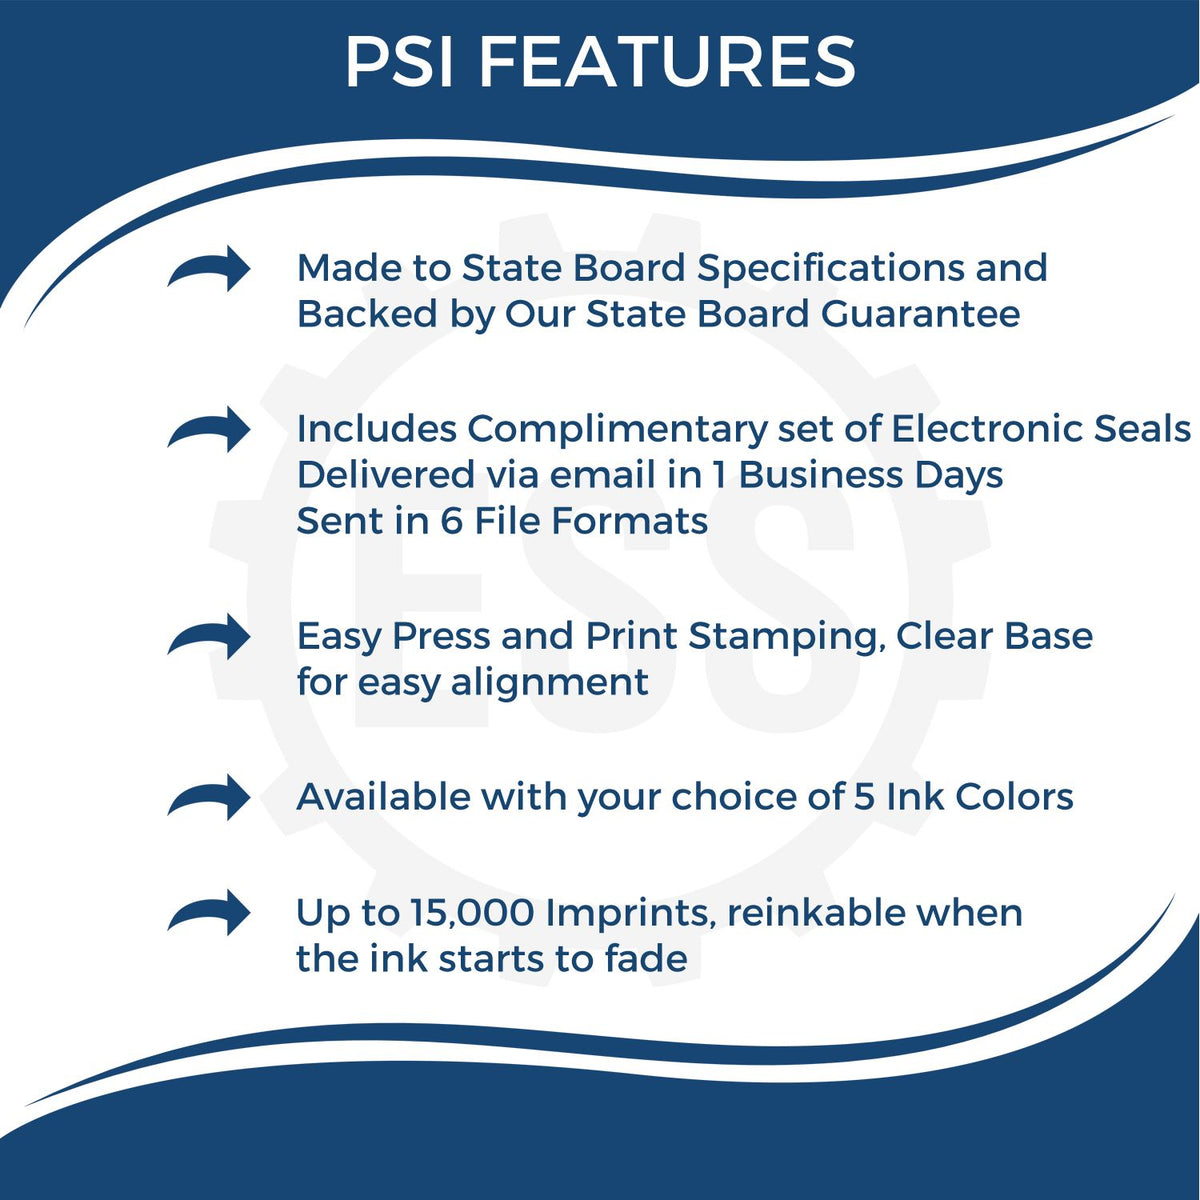 A picture of an infographic highlighting the selling points for the PSI Oregon Notary Stamp